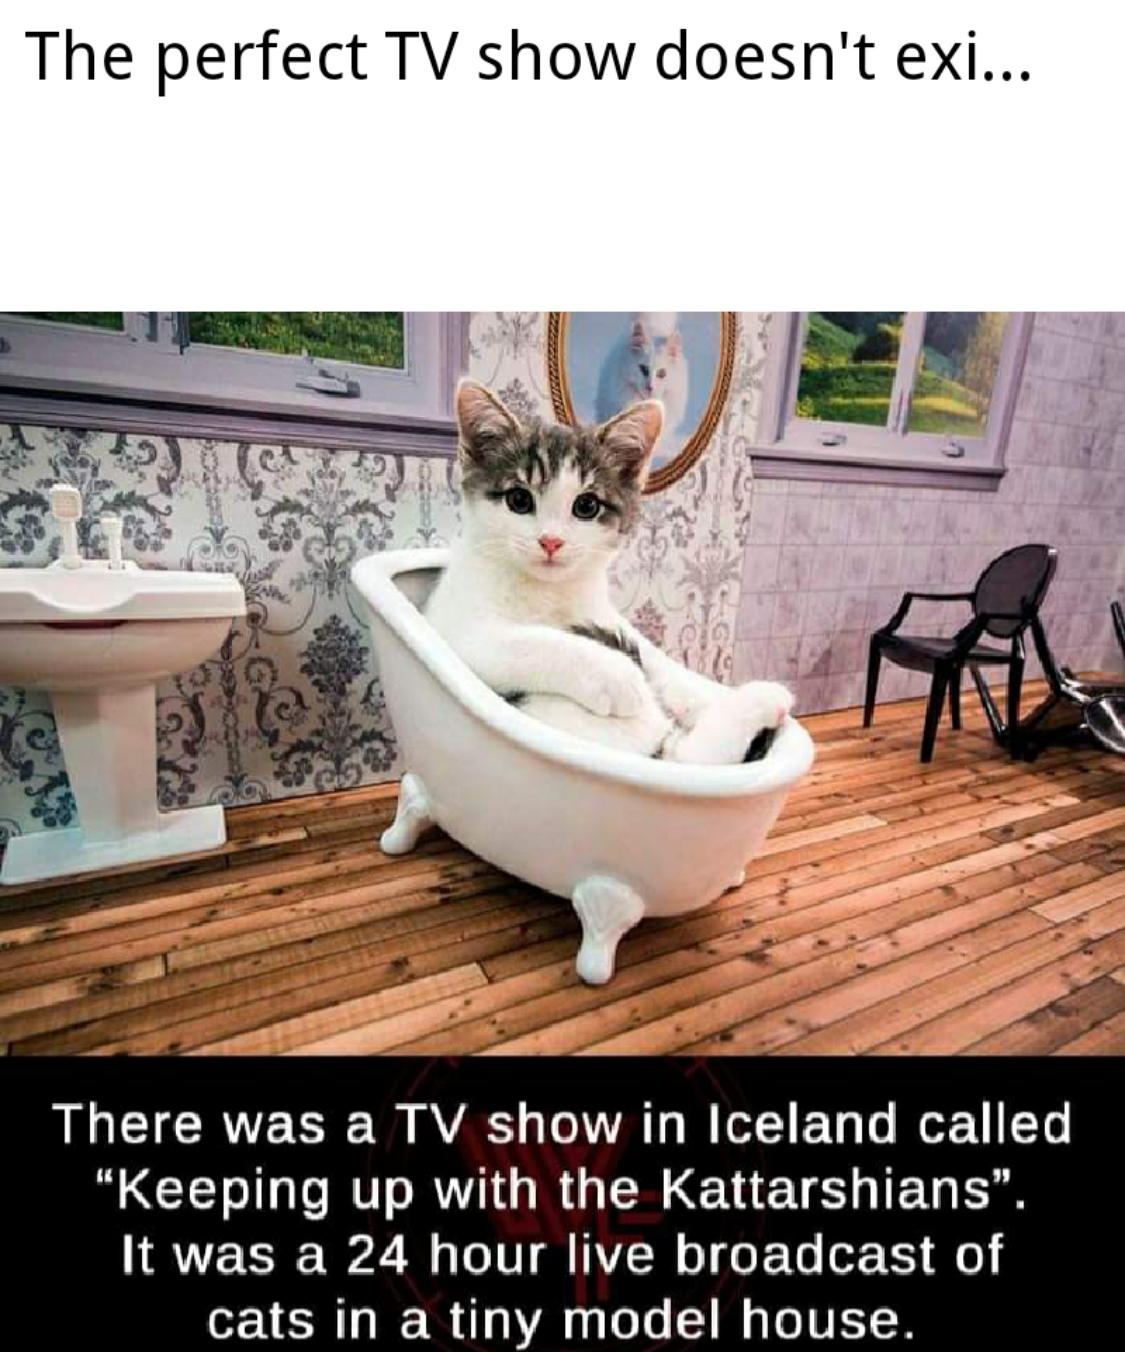 keeping up with the kattarshians - The perfect Tv show doesn't exi... There was a Tv show in Iceland called "Keeping up with the Kattarshians". It was a 24 hour live broadcast of cats in a tiny model house.